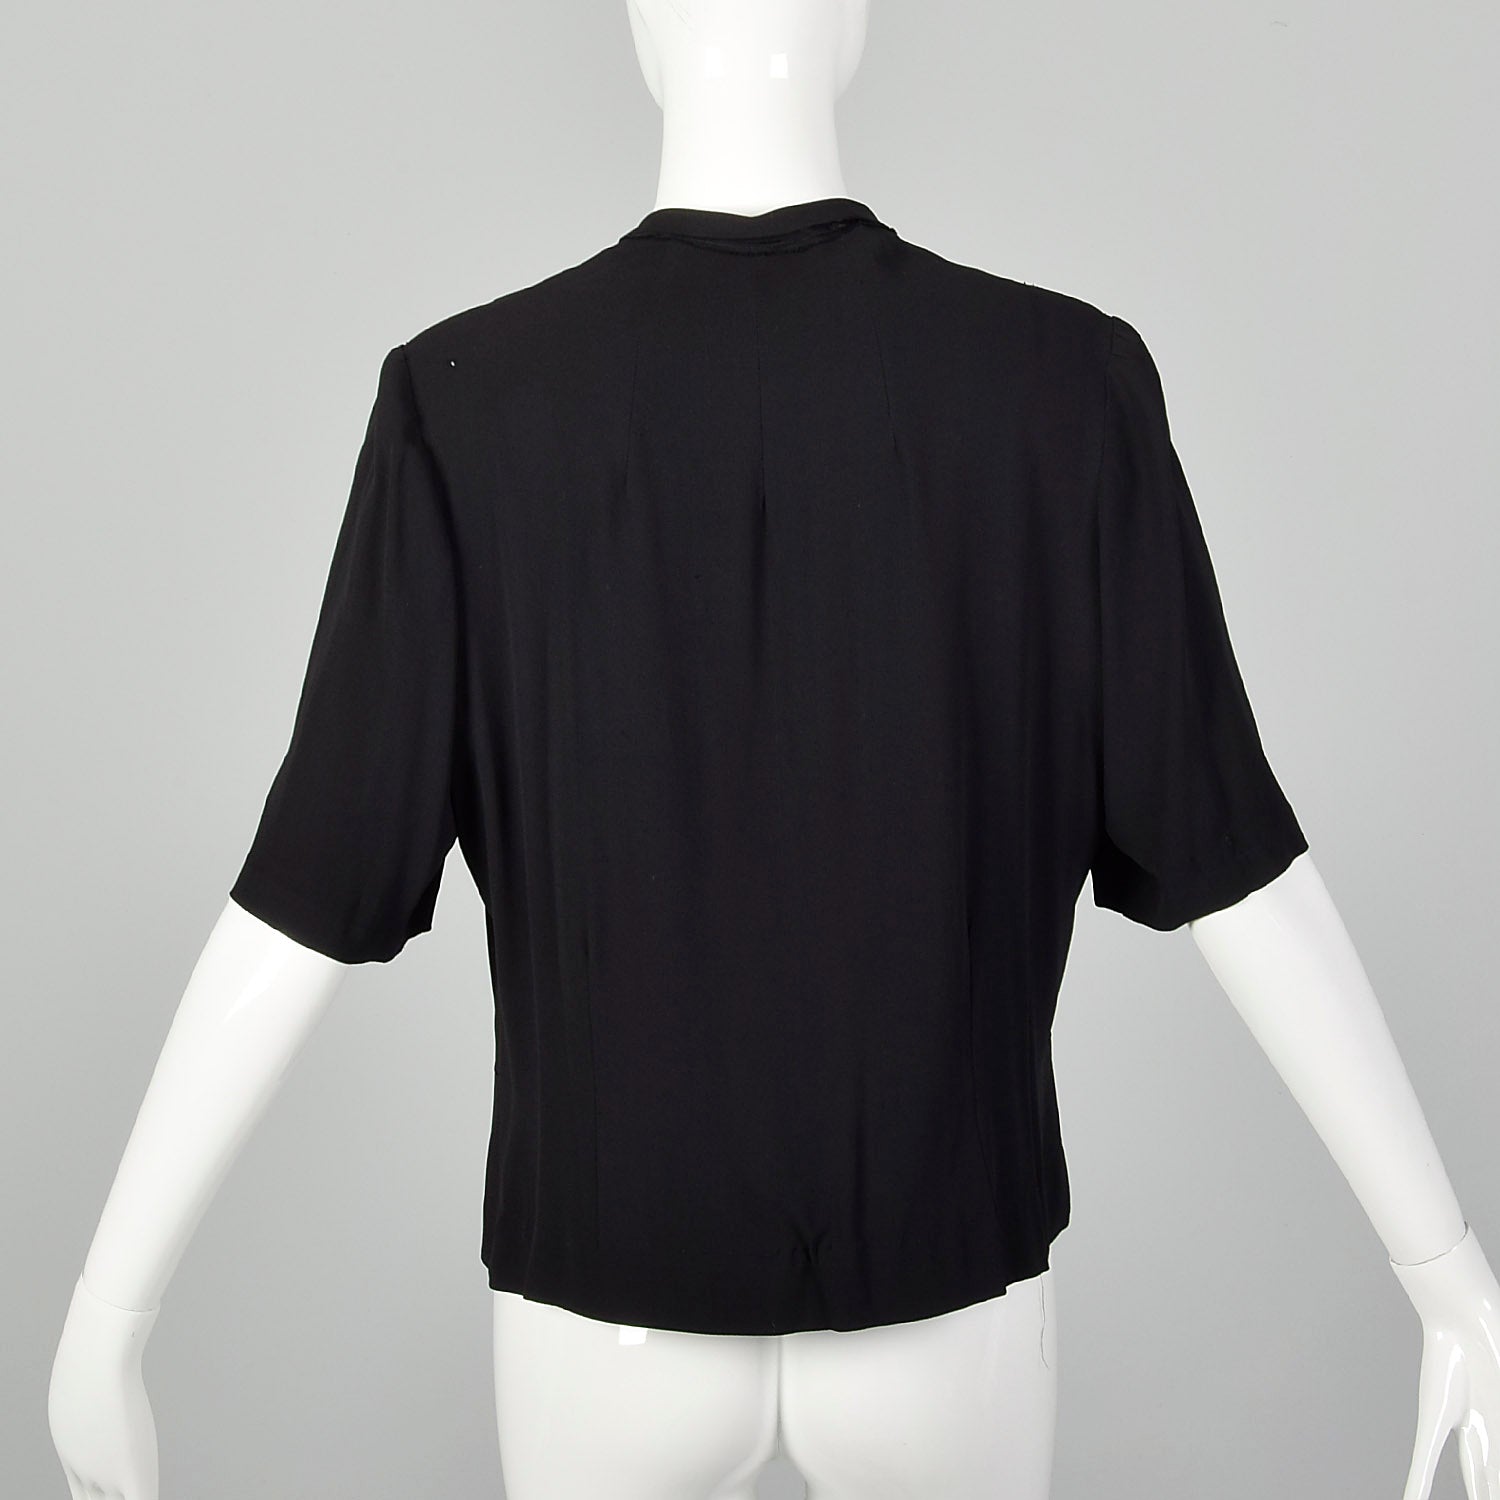 Large 1950s Black Top Rayon Beaded